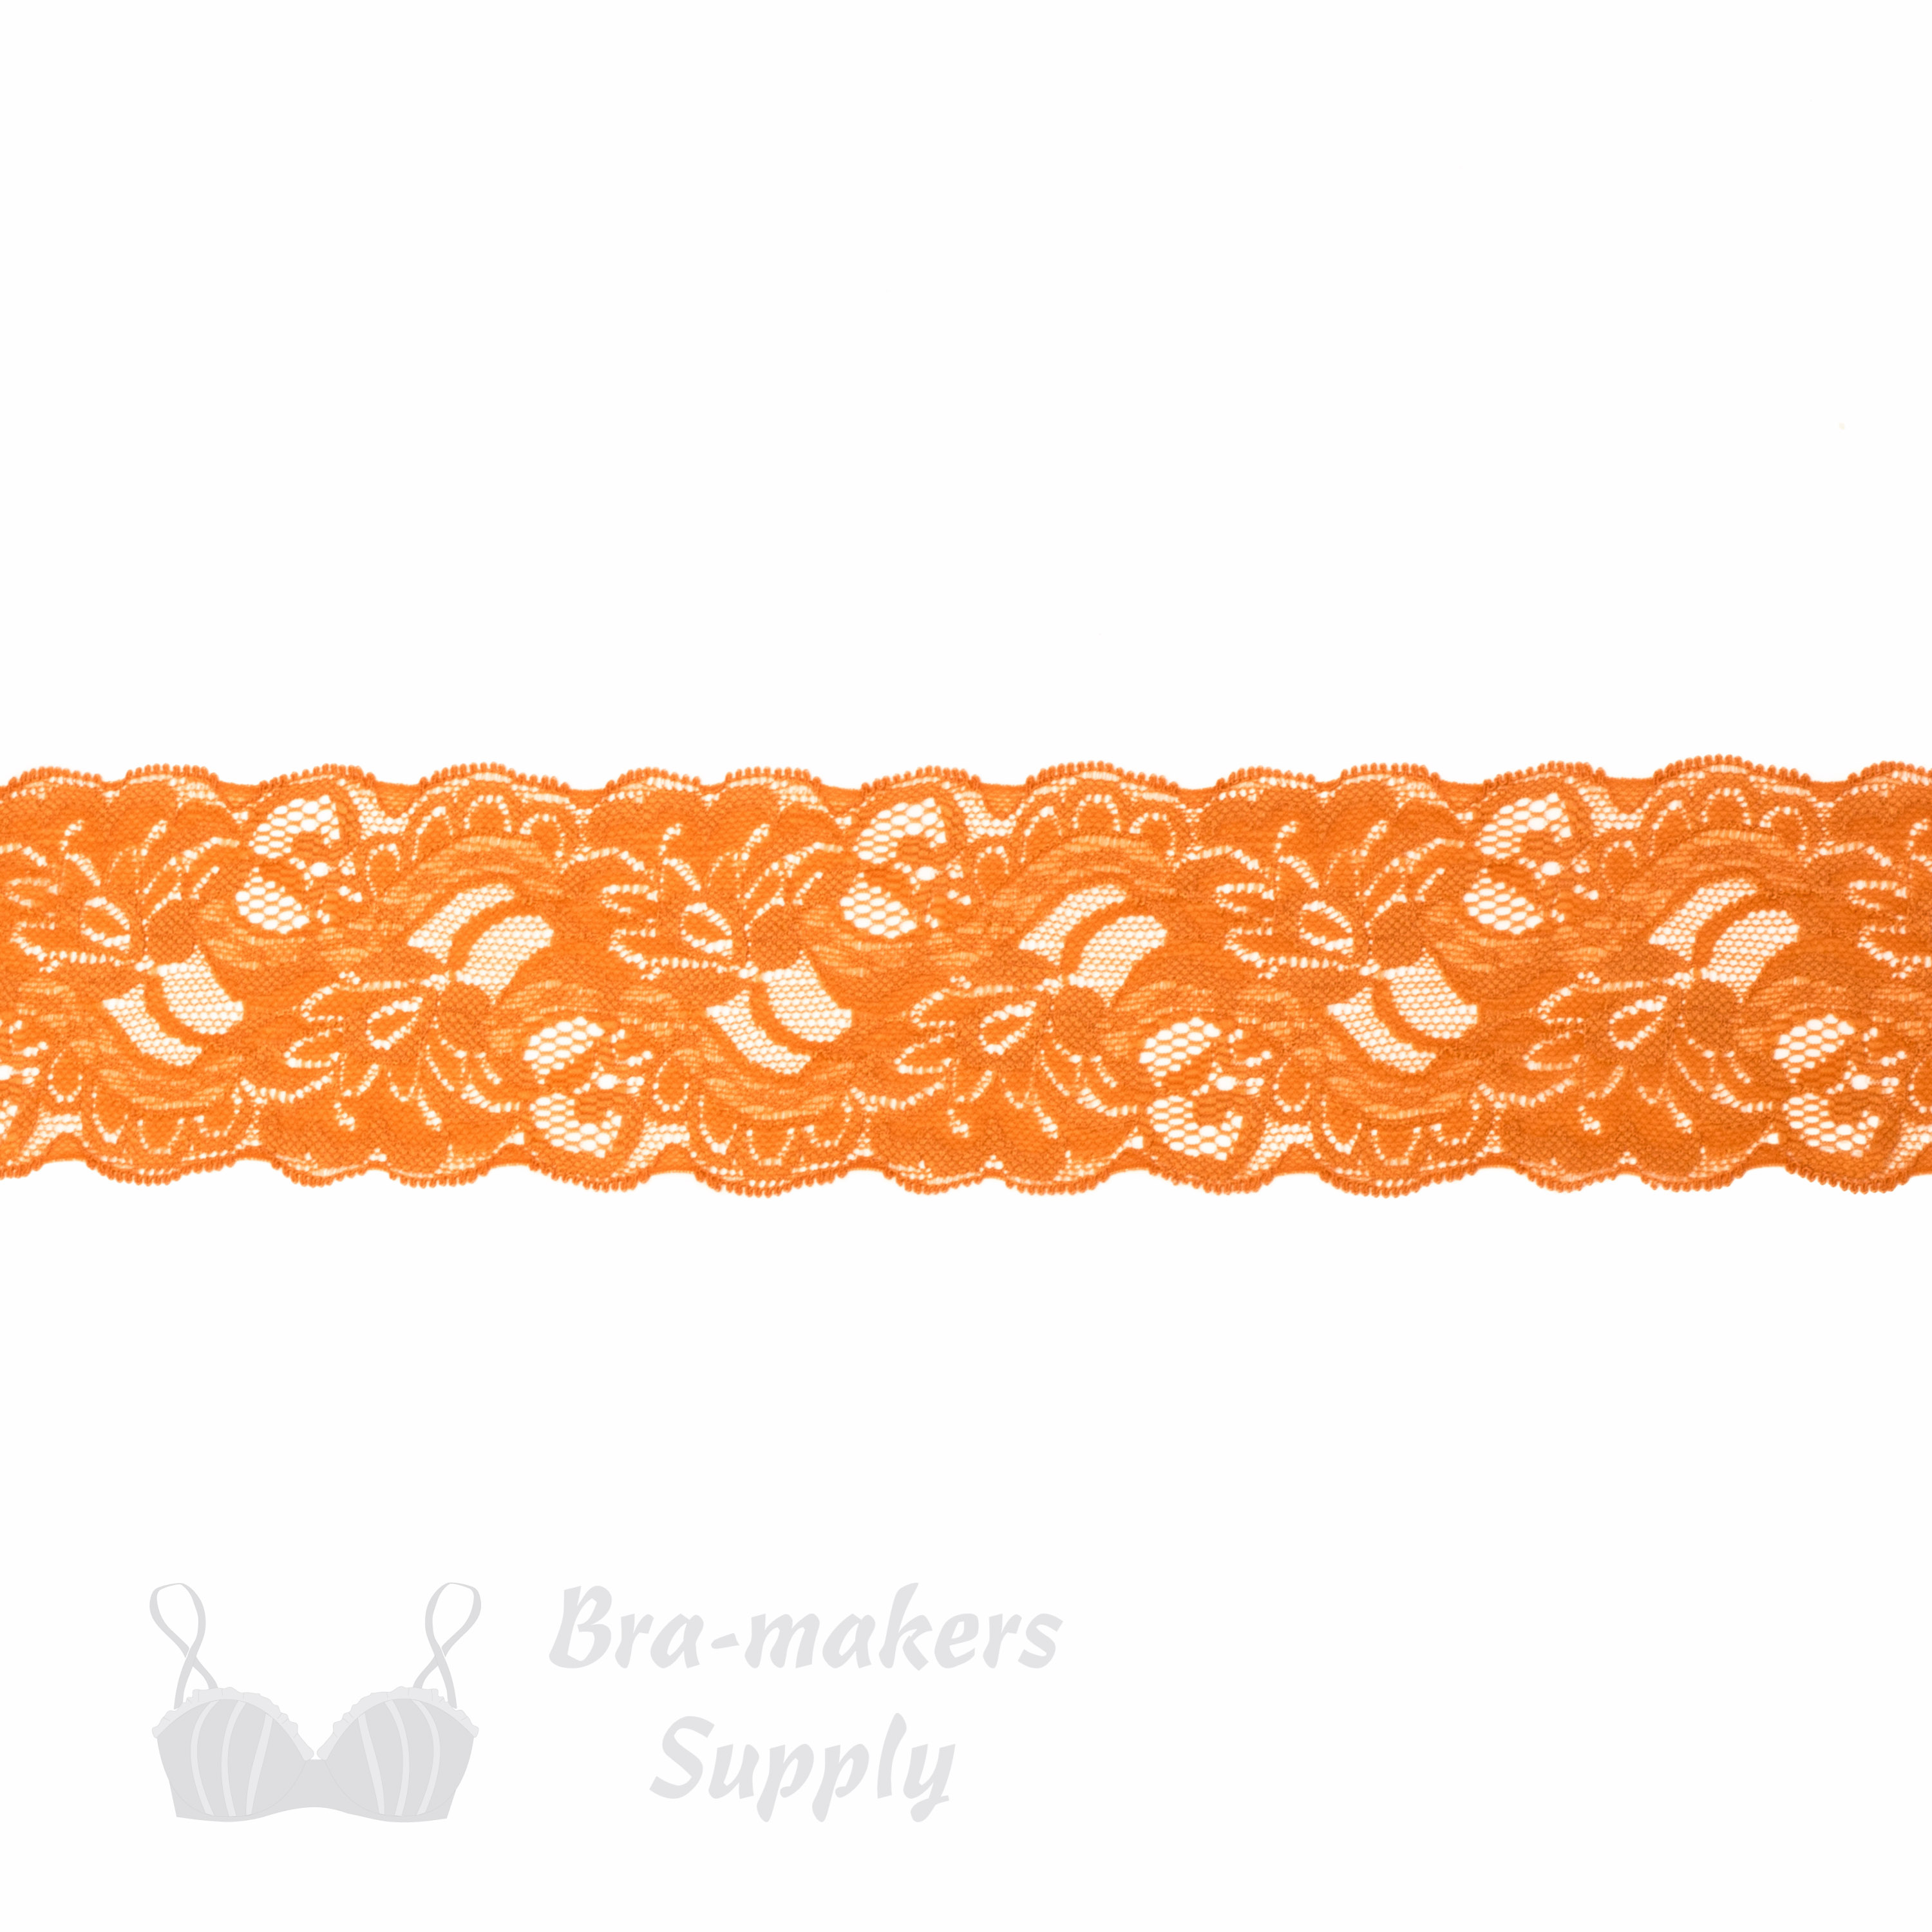 Three Inch Orange Floral Stretch Lace - Bra-Makers Supply